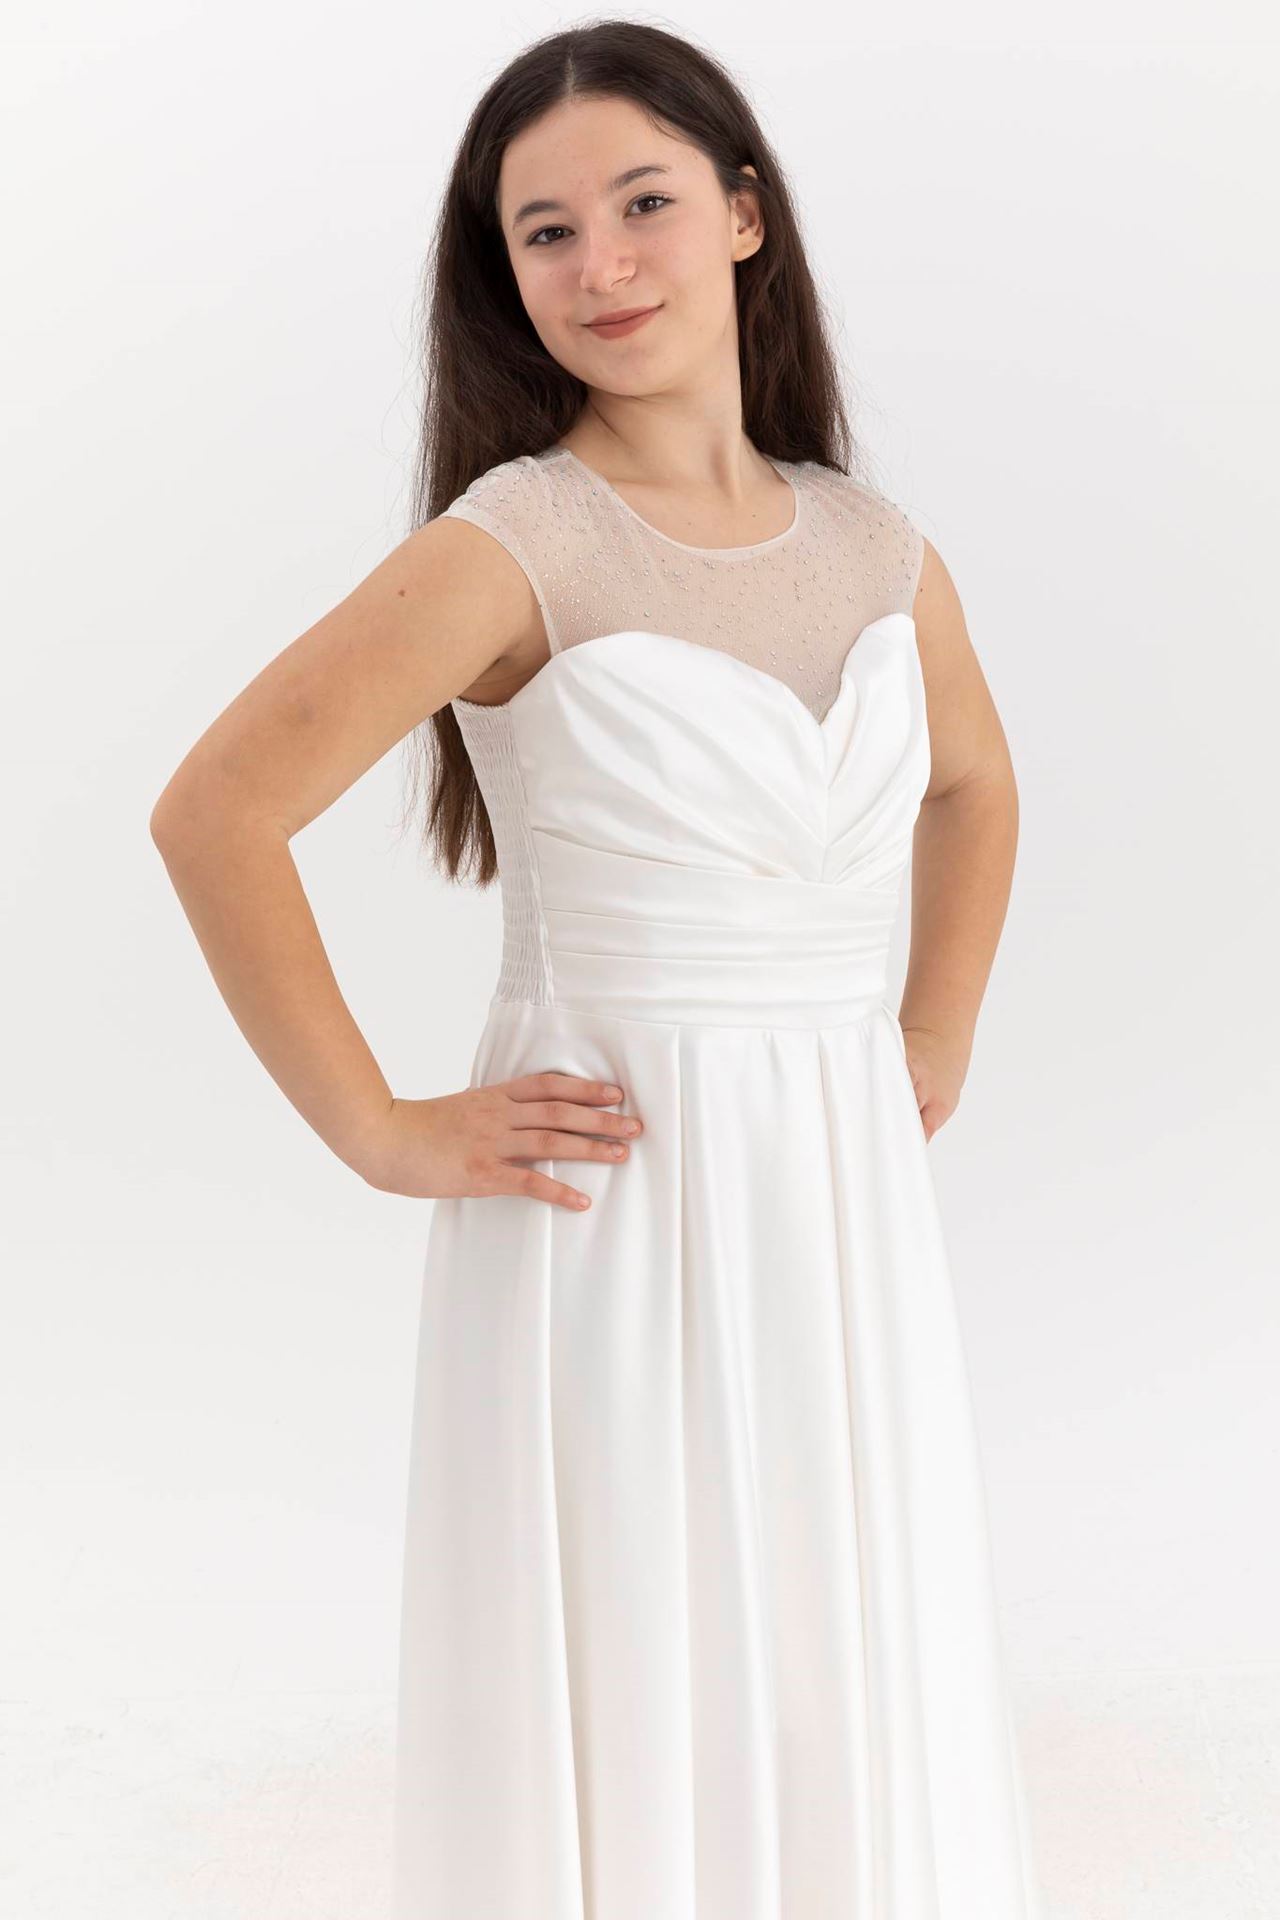 Minerva 12-16 Years Old Girl Dress 50005 Off White